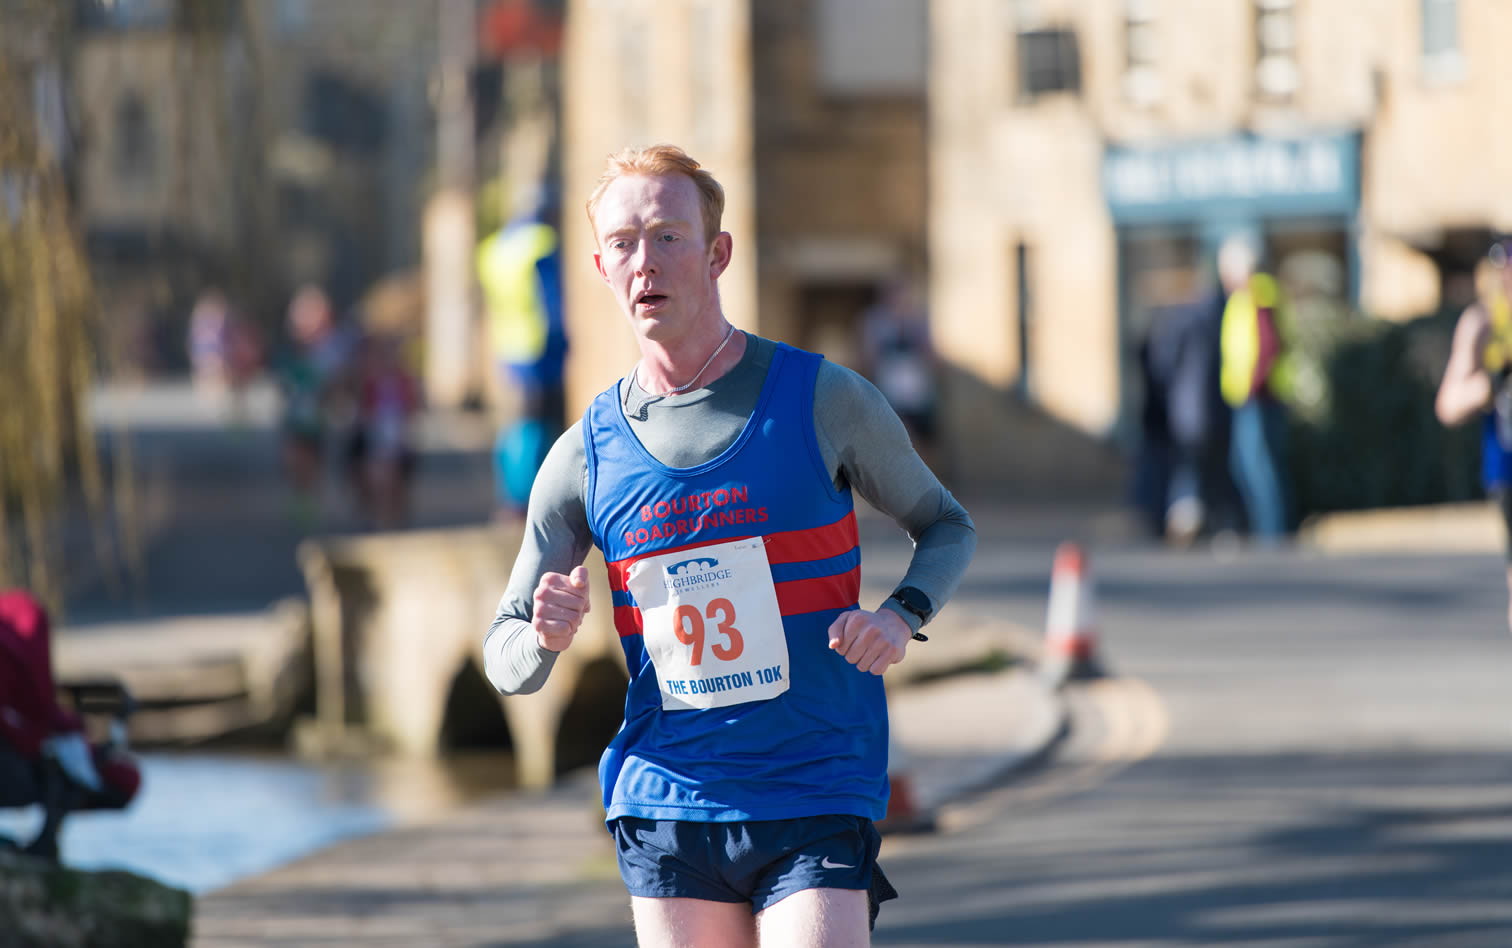 Pete Carrick at Bourton 10k - 27th February 2022